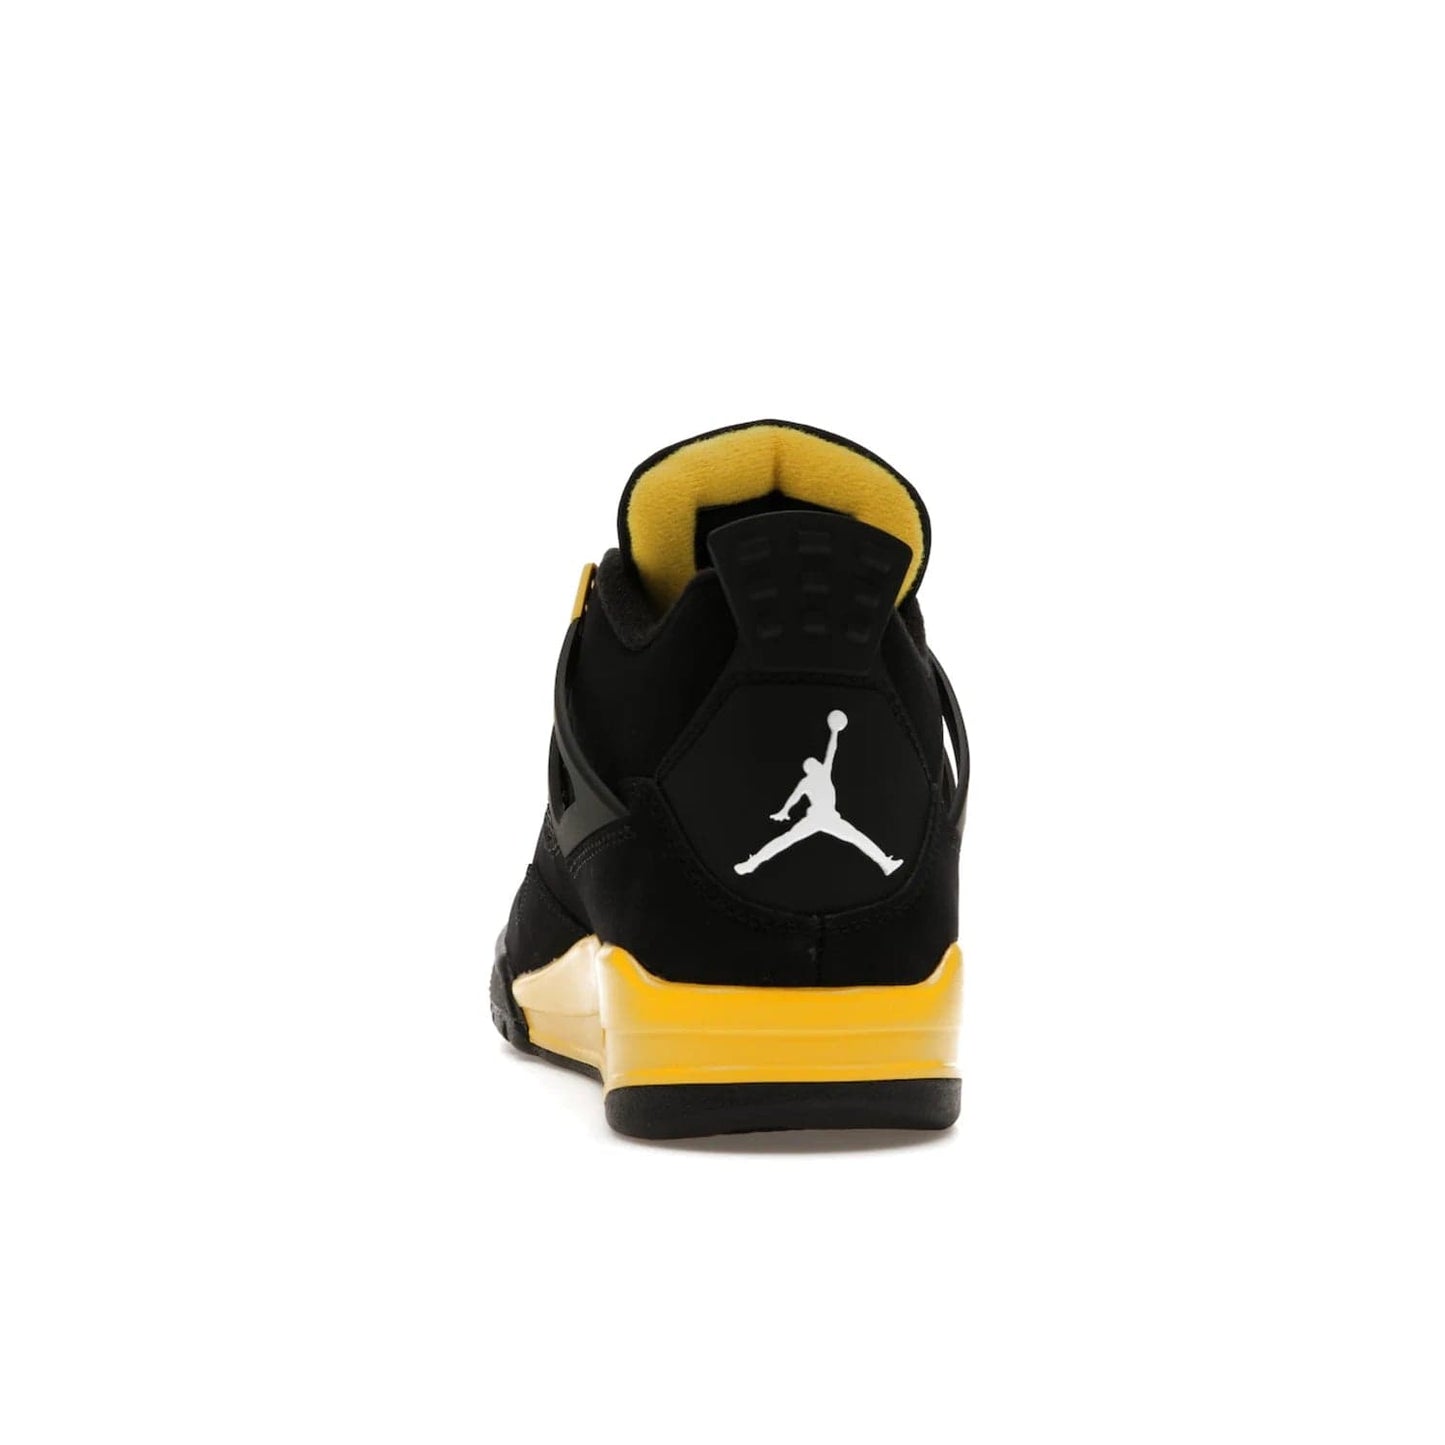 Jordan 4 Retro Thunder (2023) - Image 27 - Only at www.BallersClubKickz.com - Iconic Air Jordan 4 Retro Thunder (2023) returns with black nubuck upper and Tour Yellow details. Featuring Jumpman logo on heel tab, tongue and insoles. Dropping May 13th, 2023.